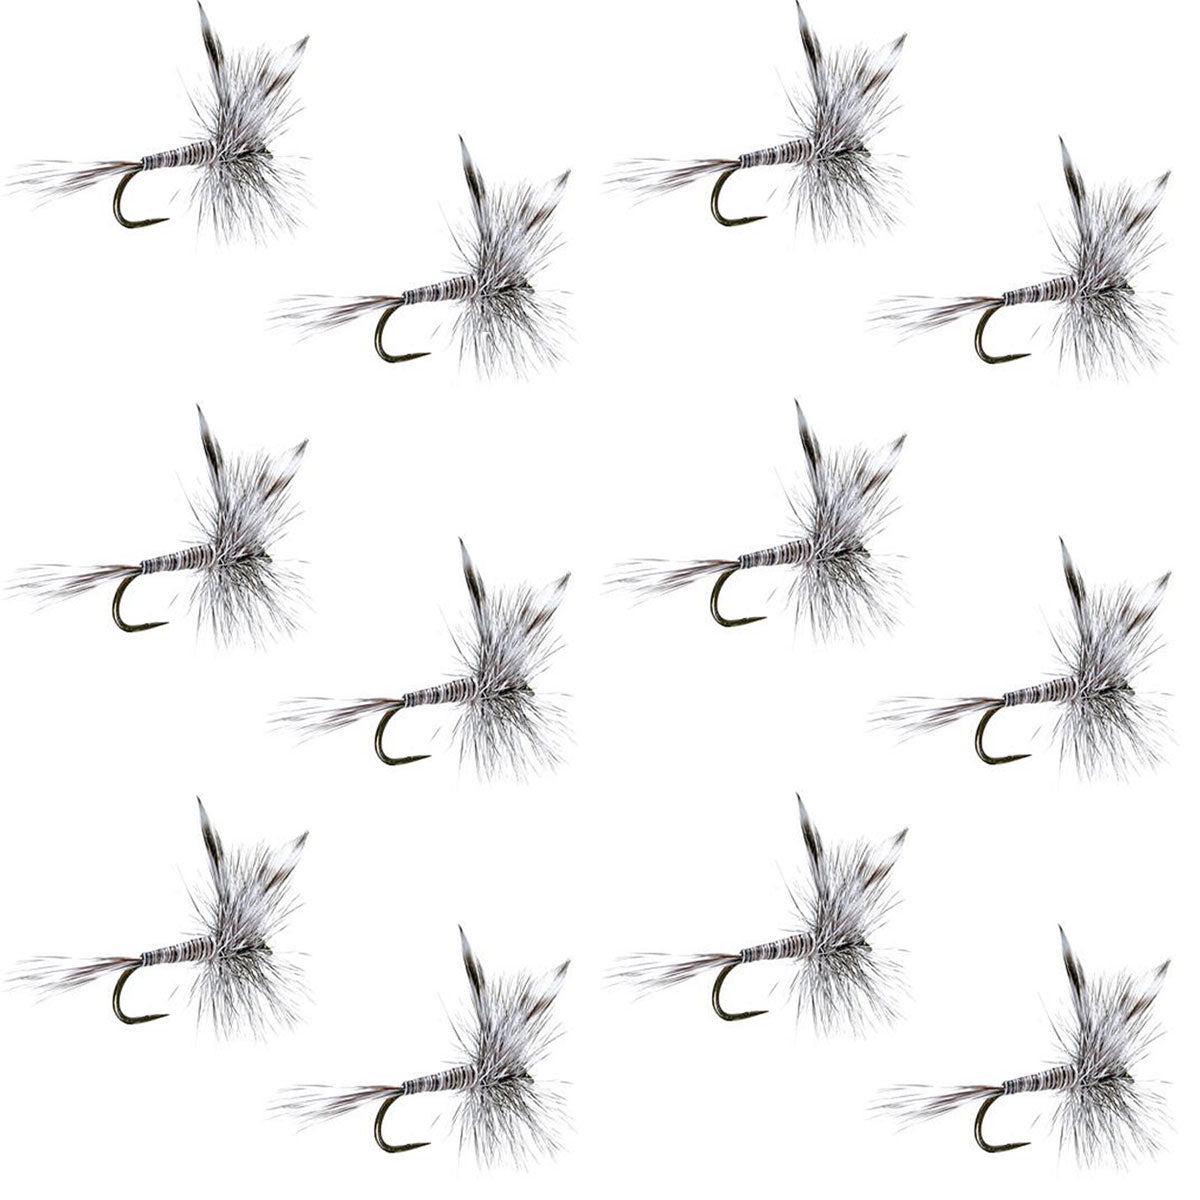 Barbless Mosquito Classic Trout Dry Fly Fishing 1 Dozen Flies - Hook Size 16